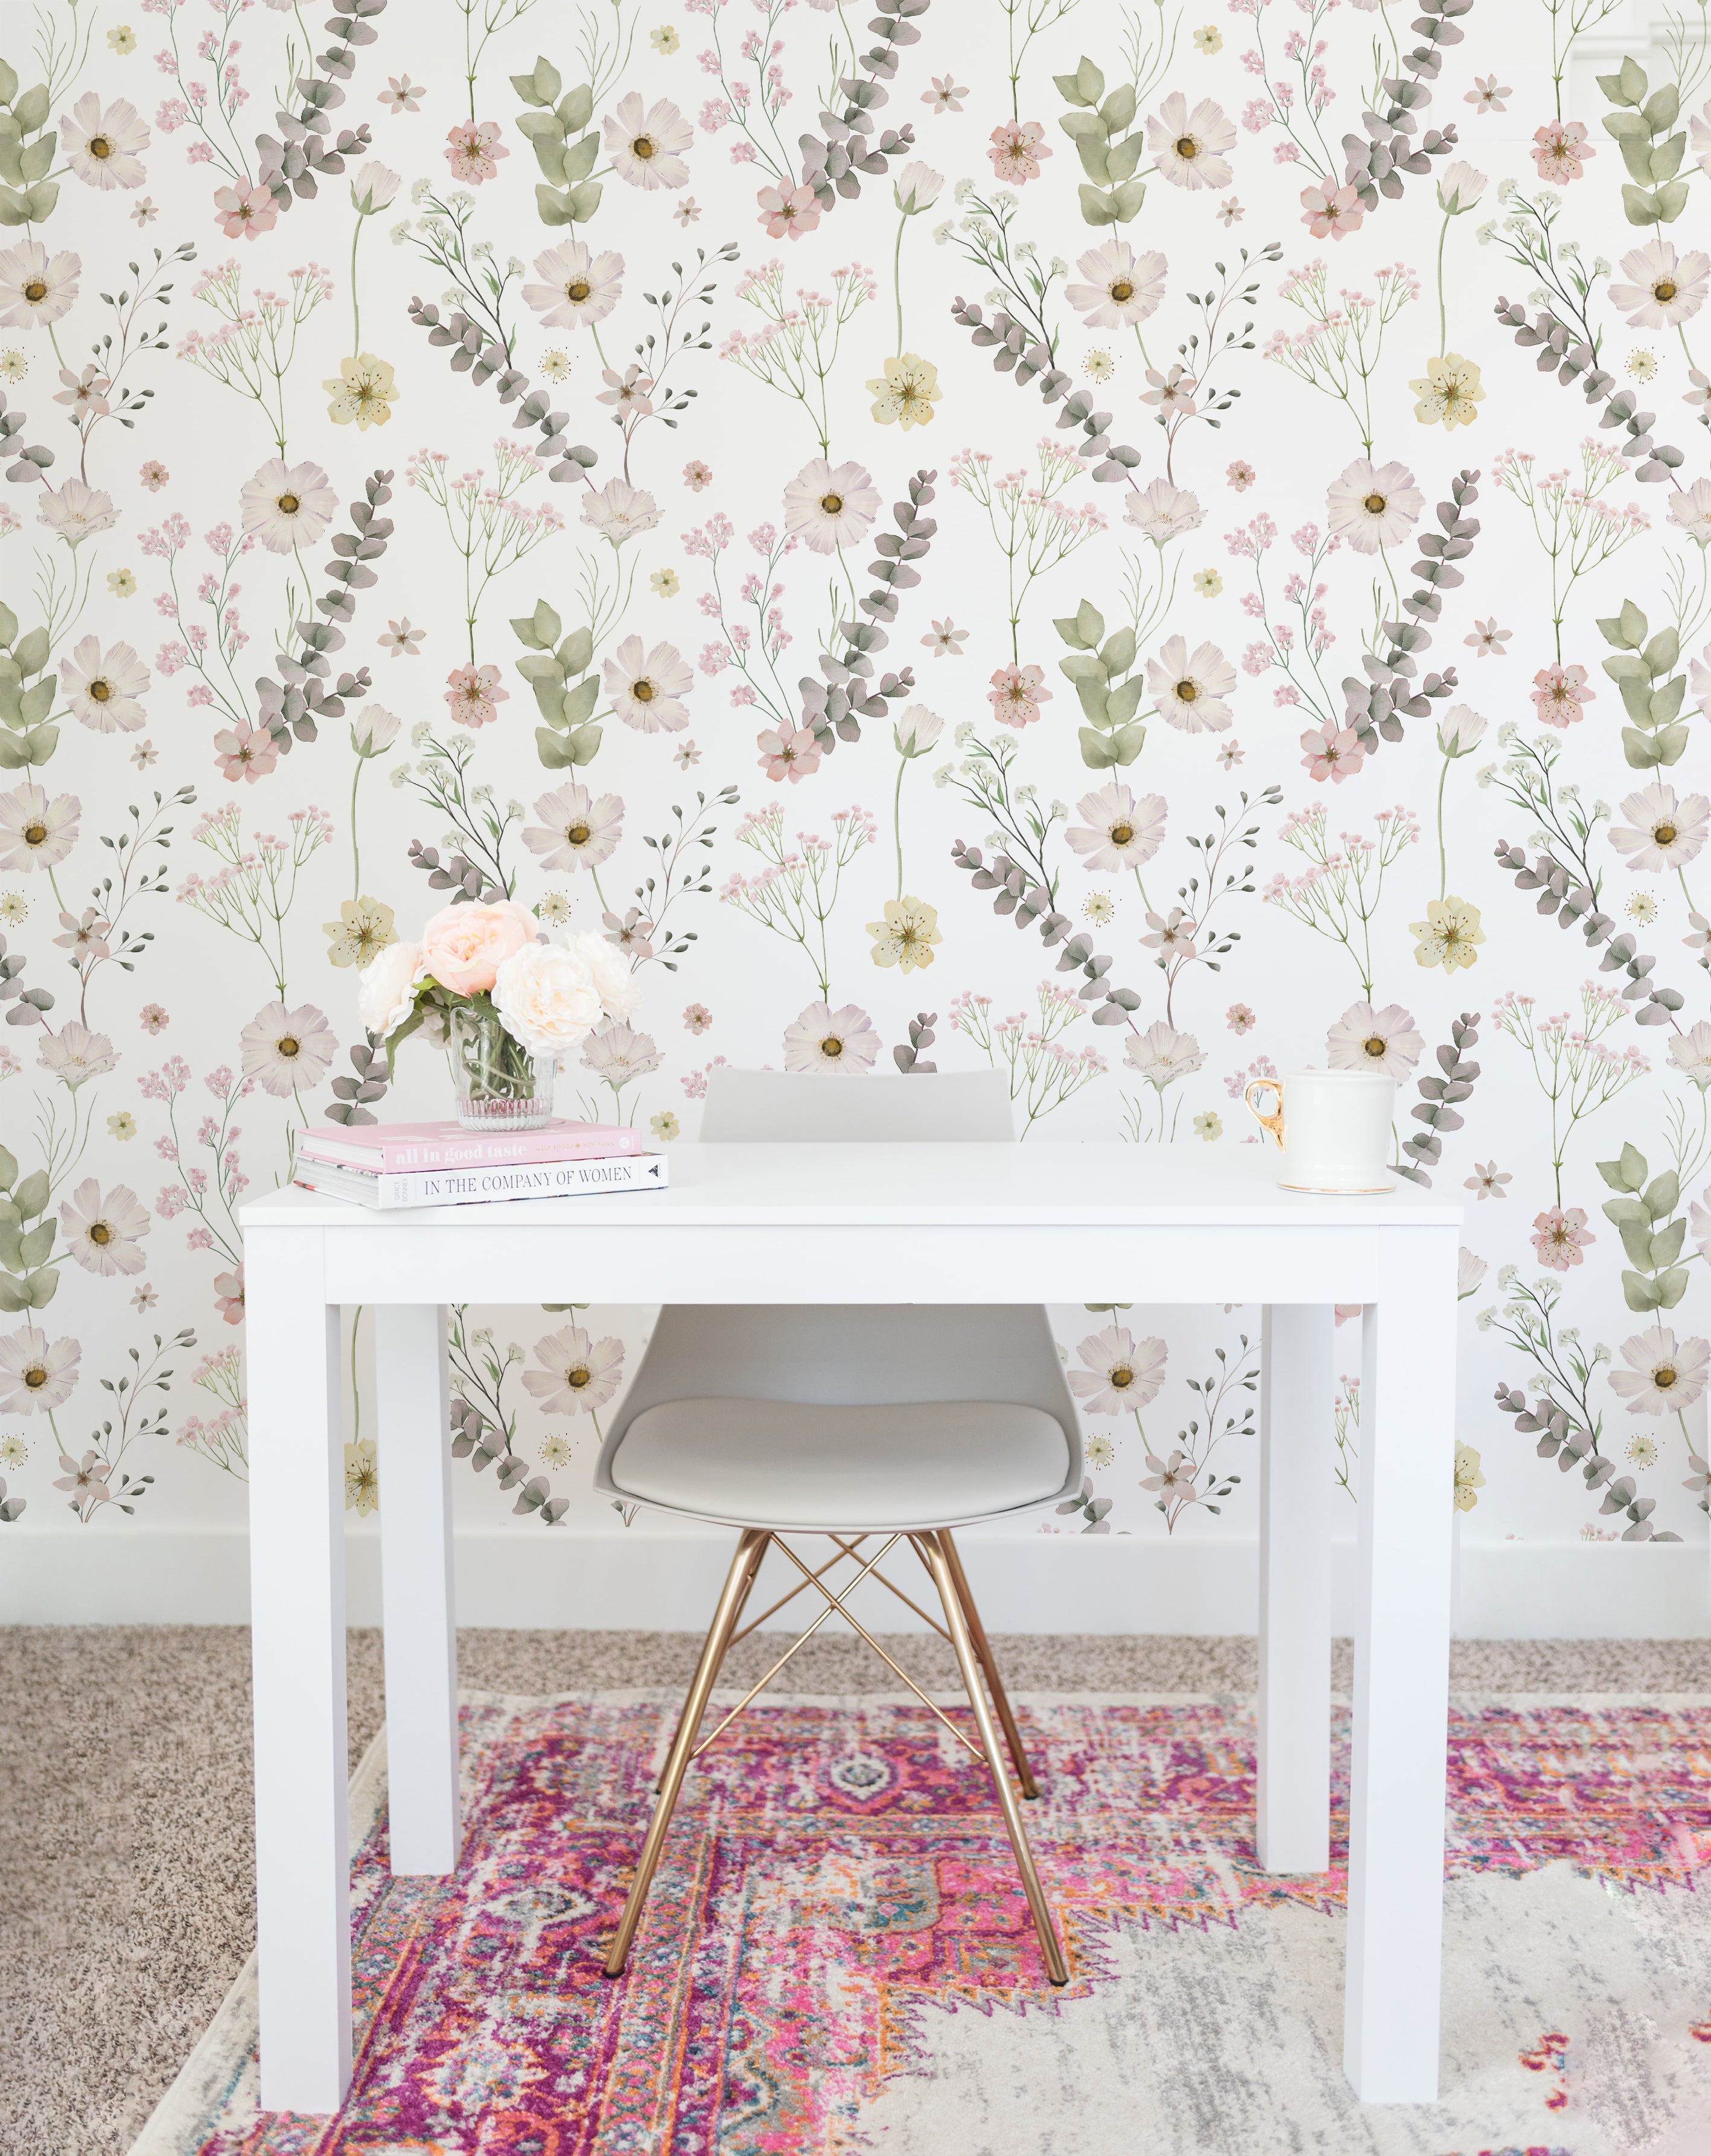 A well-lit home office corner with a white desk against a wall adorned with the Botanical Muse Wallpaper, featuring a pattern of soft-colored wildflowers and eucalyptus leaves. On the desk, a gray modern chair with gold legs, a small vase of peach roses, books, and a candle create a serene workspace.